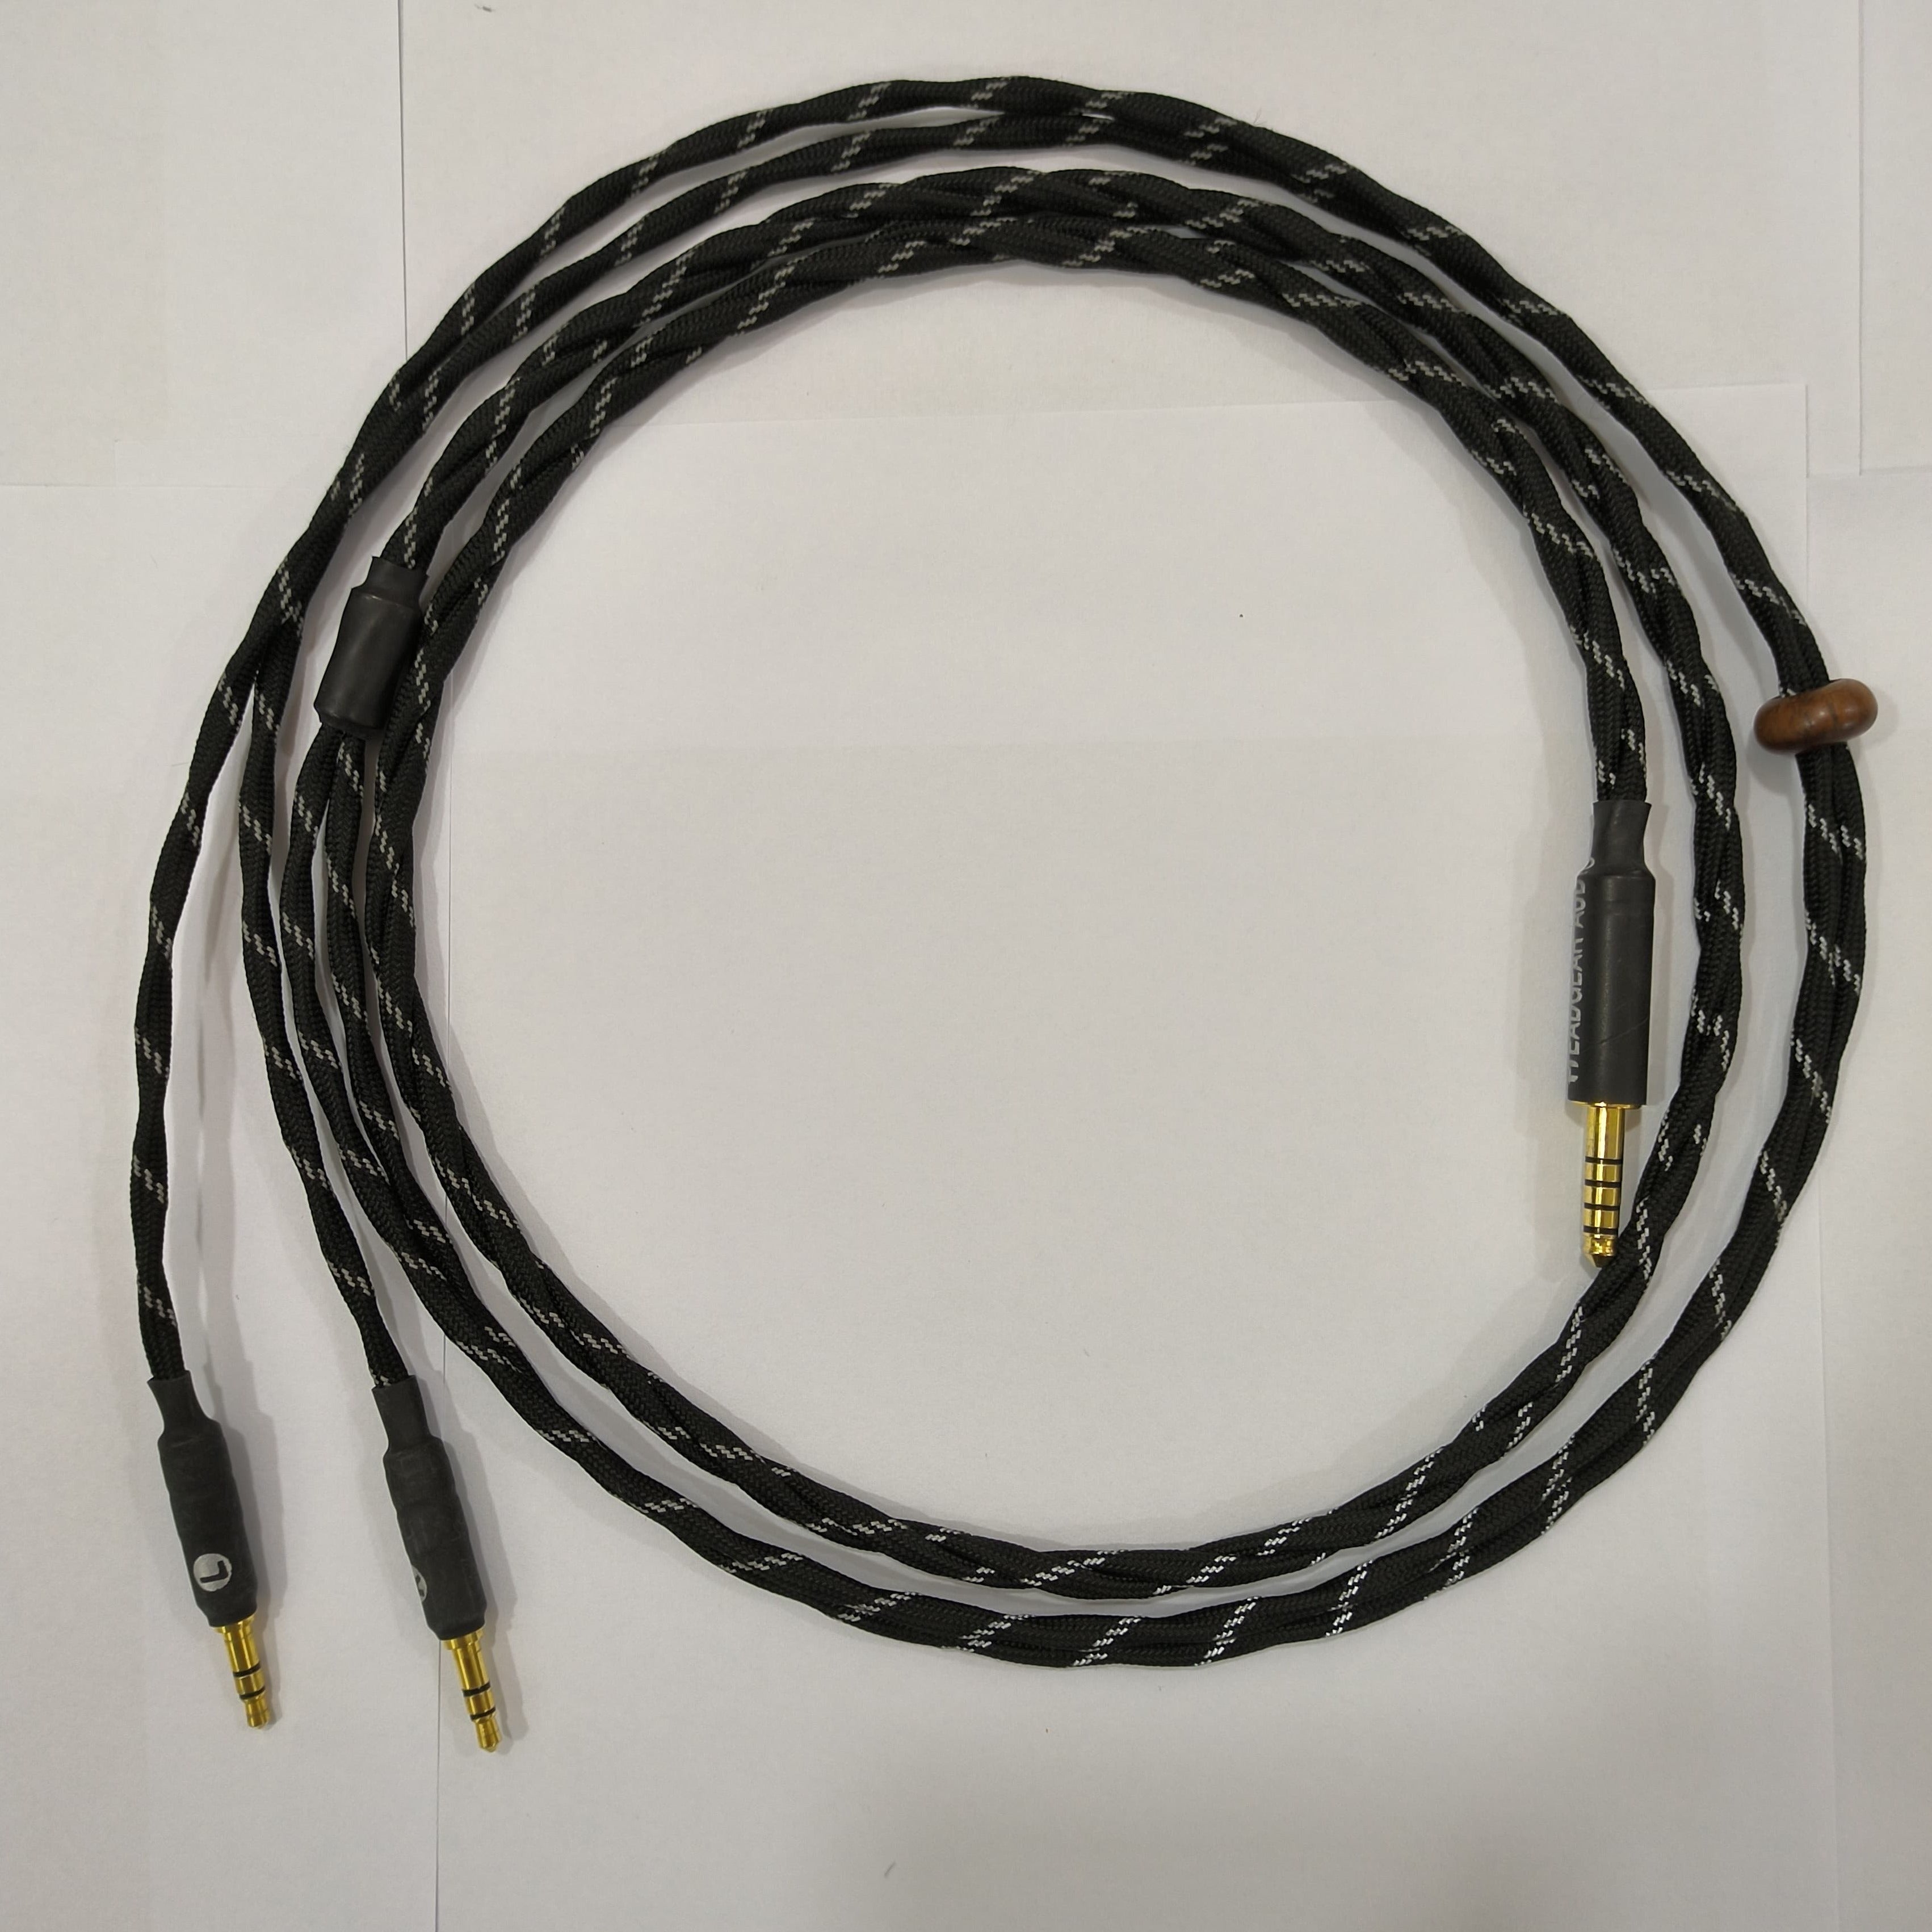 HiFiMAN - Edition XS + Headgear Audio - Balanced Cable (Pre-Owned)